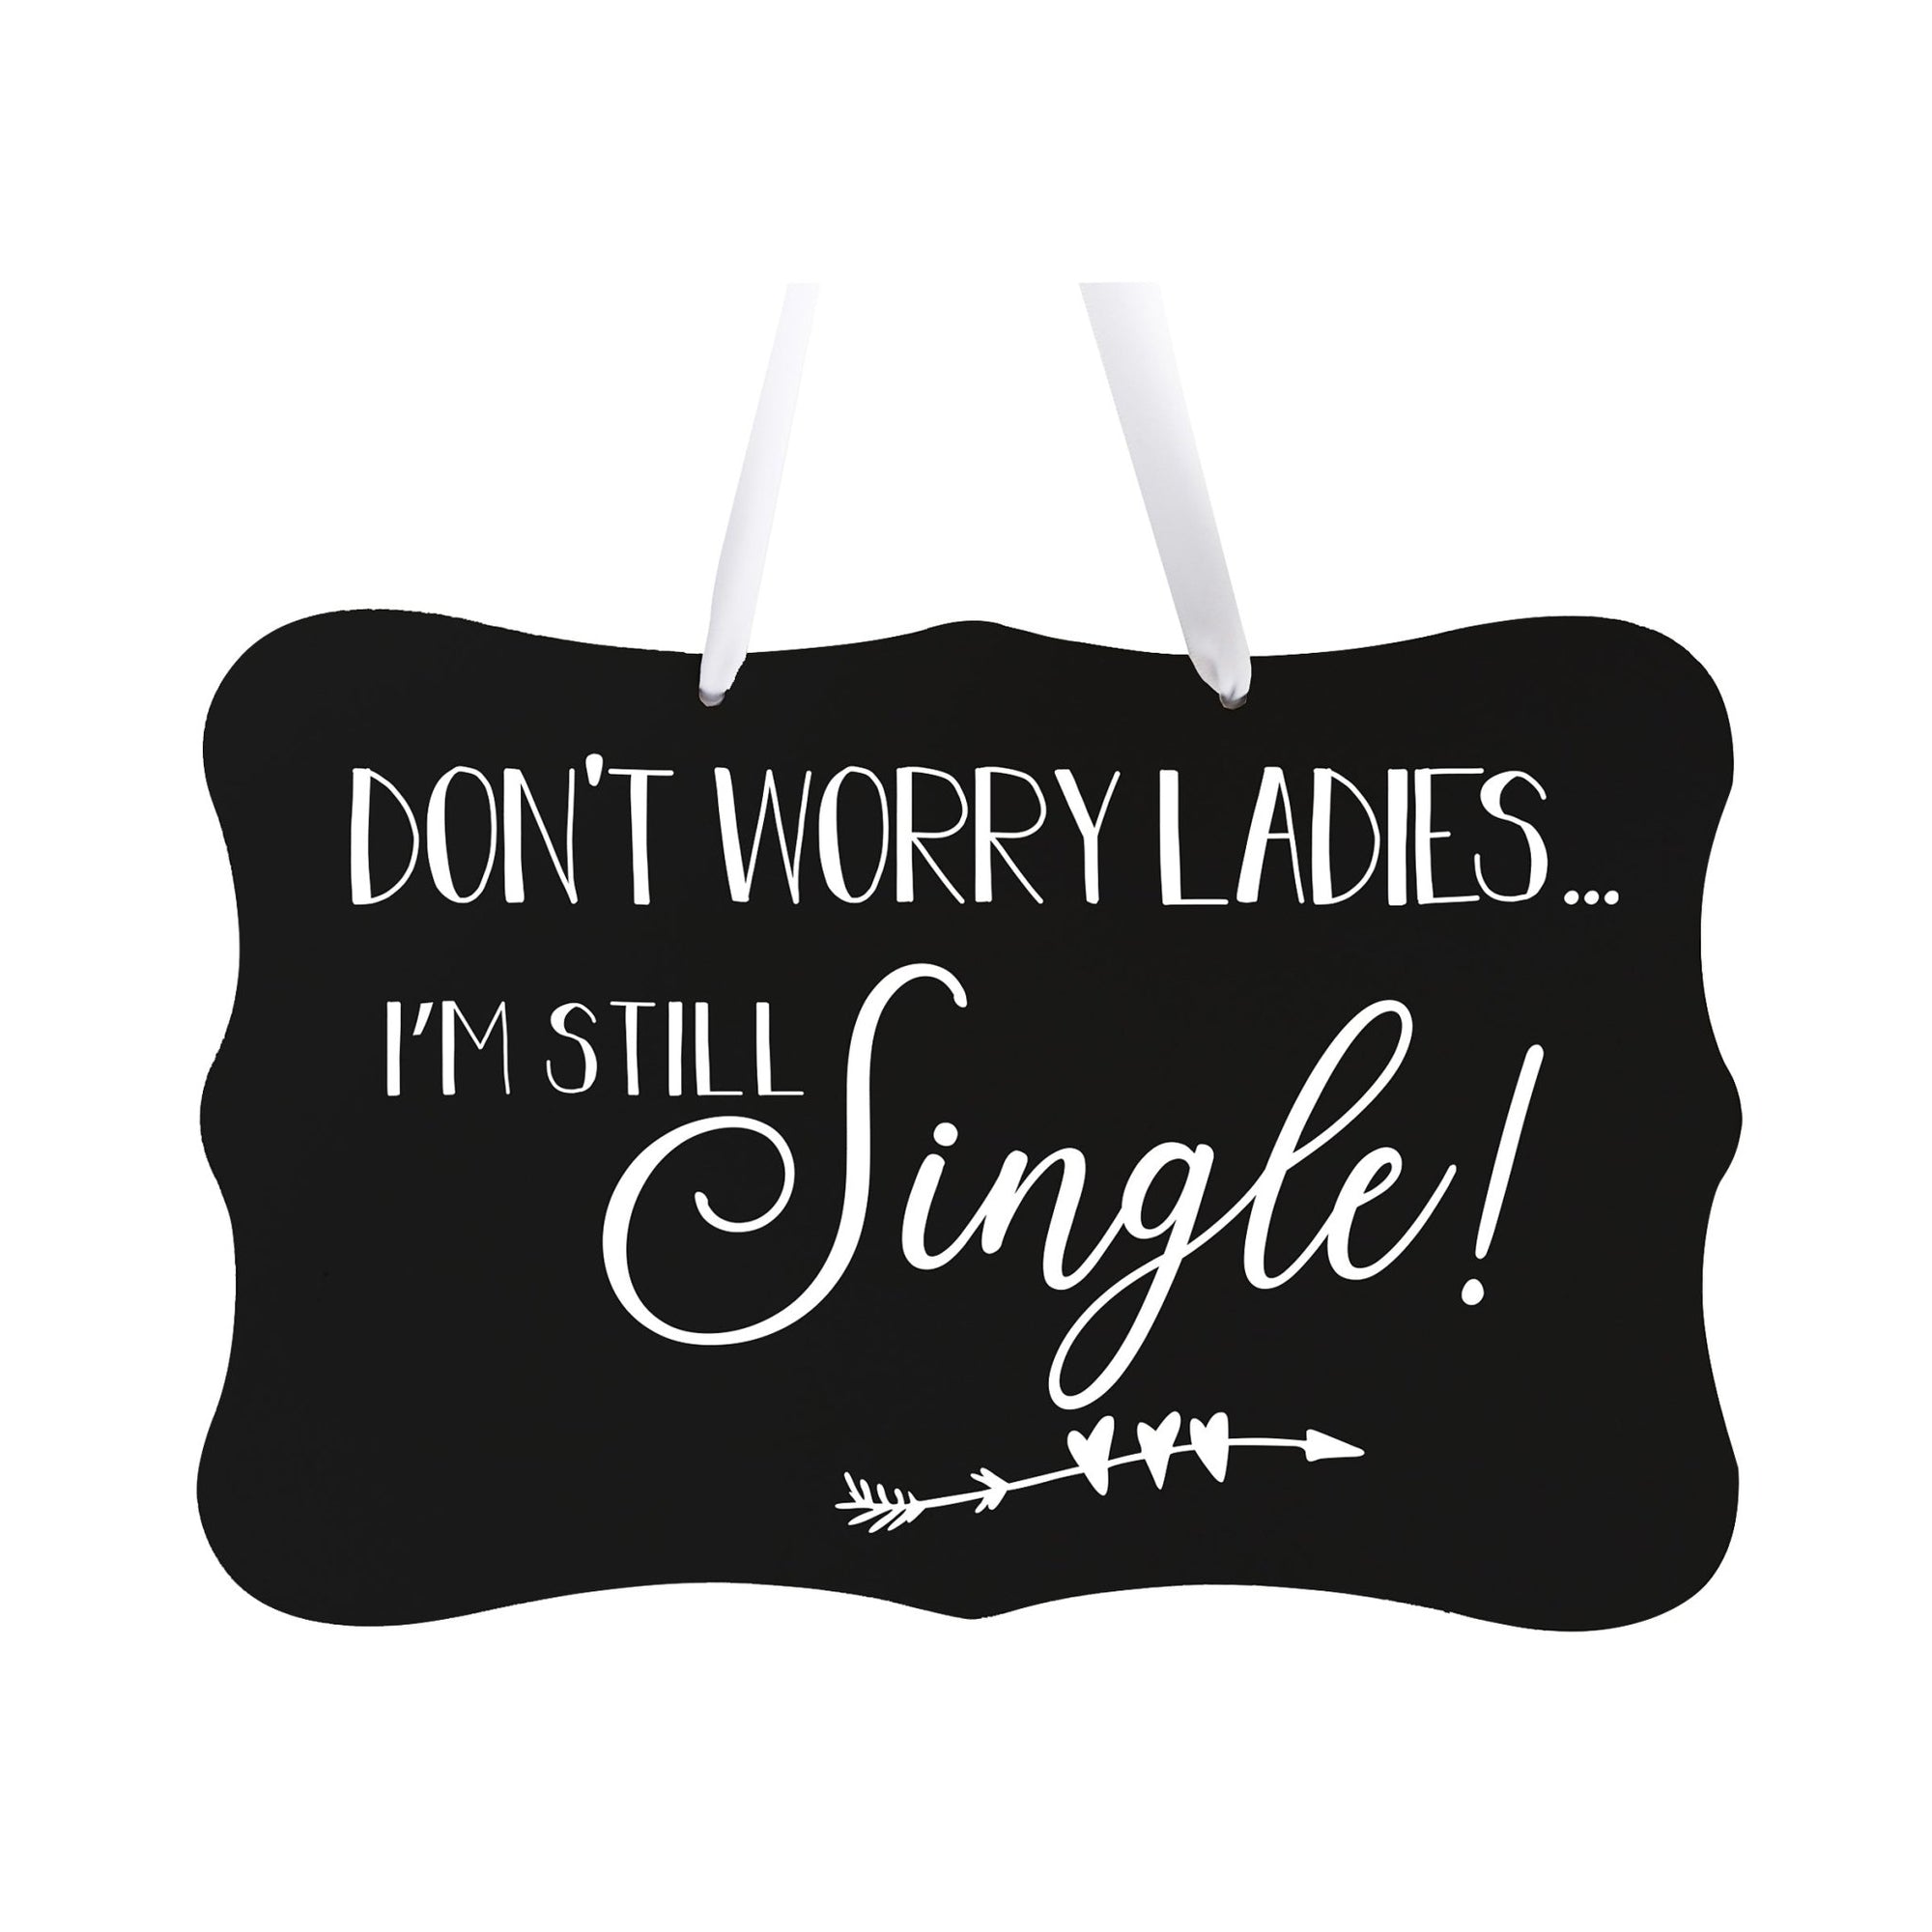 Funny Modern Wooden Ribbon Wall Sign For Ladies 8x12 - Don’t Worry Ladies (Arrows) - LifeSong Milestones